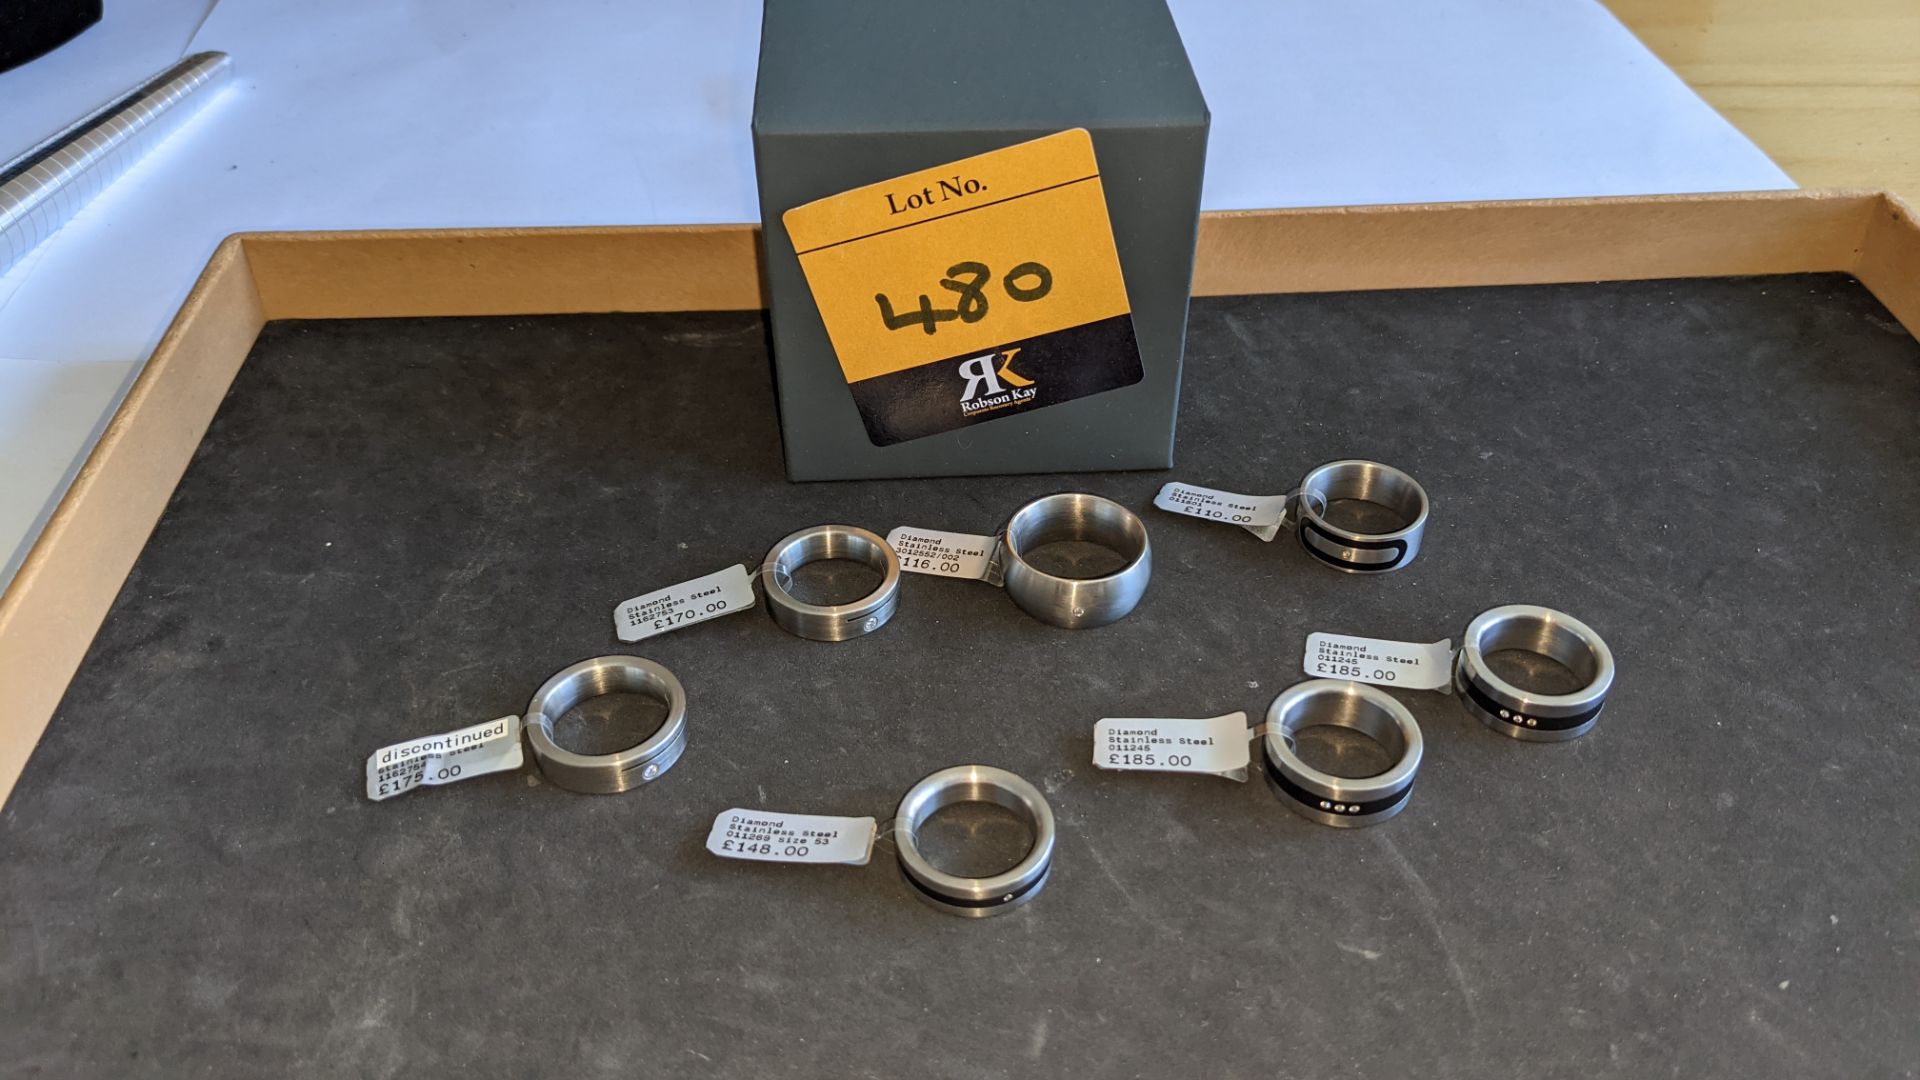 7 off assorted stainless steel & diamond rings. RRPs from £110 - £185. Total RRP £1,089